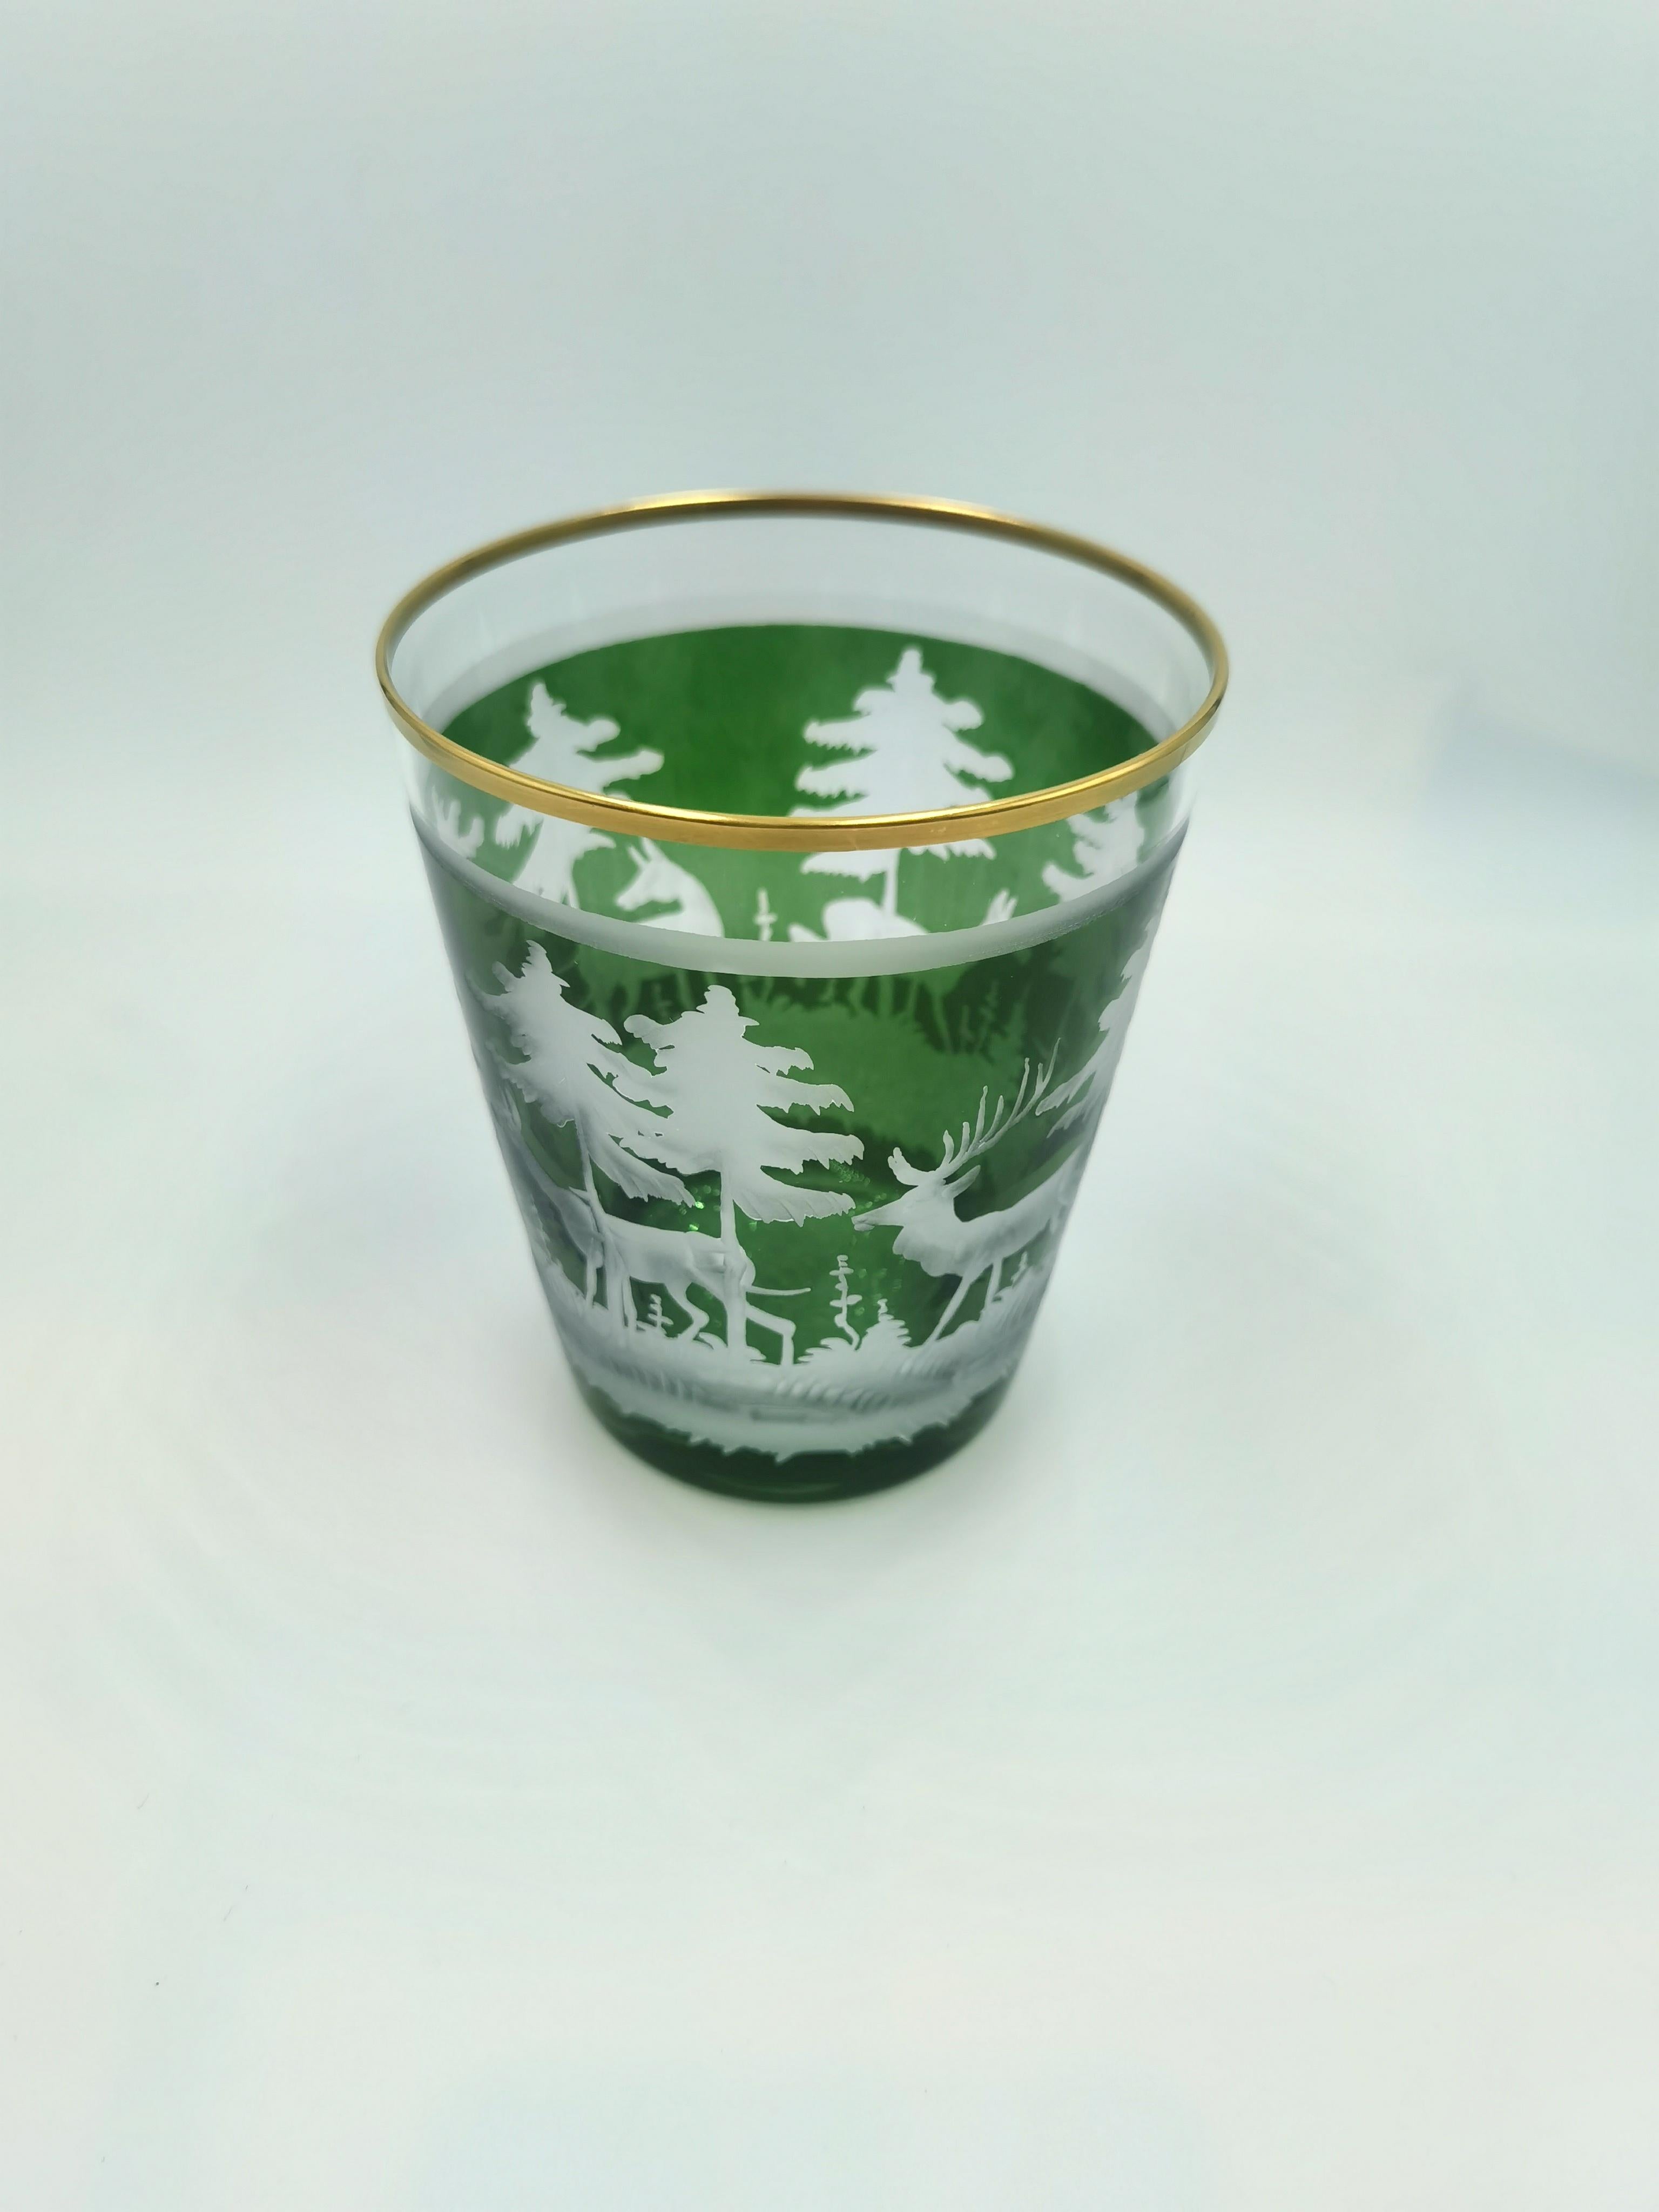 Hand blown crystal latern in green crystal glass from Bavaria Germany. The decor is hands-free engraved by glass artists all around with a hunting scene with trees in the style of Black Forest. Rimmed with a 24 carat gold line. Sofina glass and